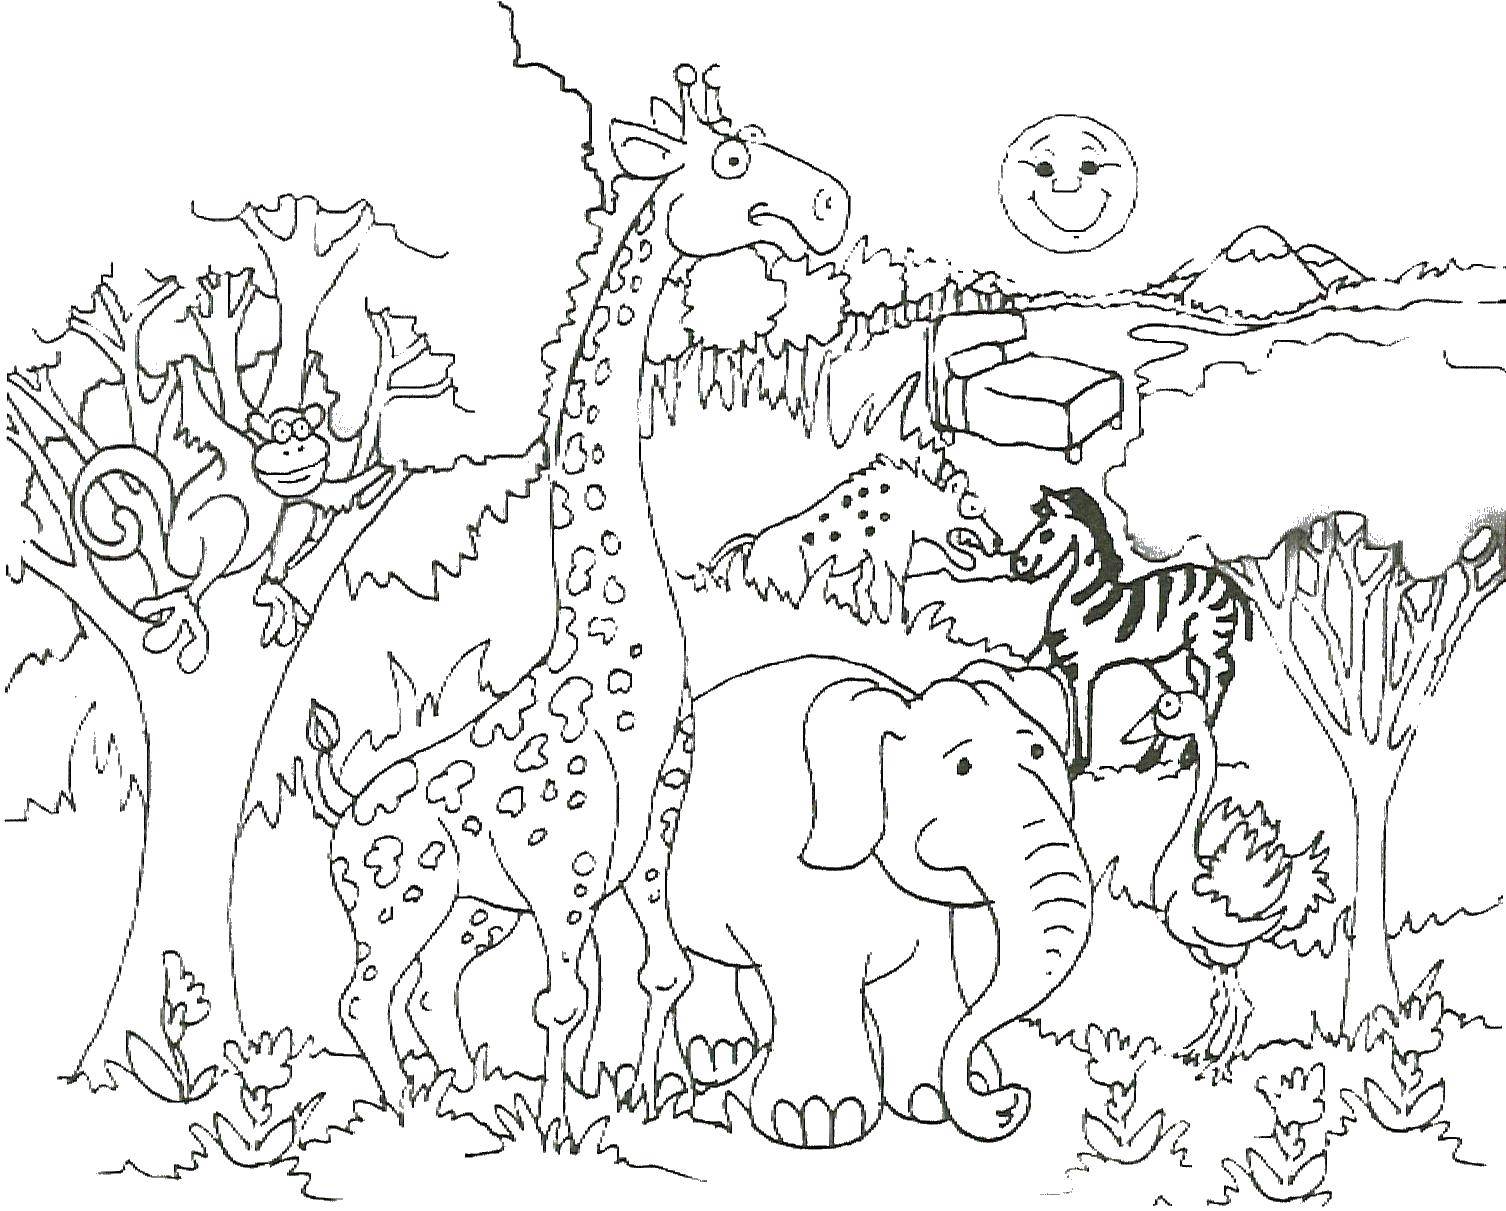 Coloring Animals zoo. Category Animals. Tags:  animals, zoo.